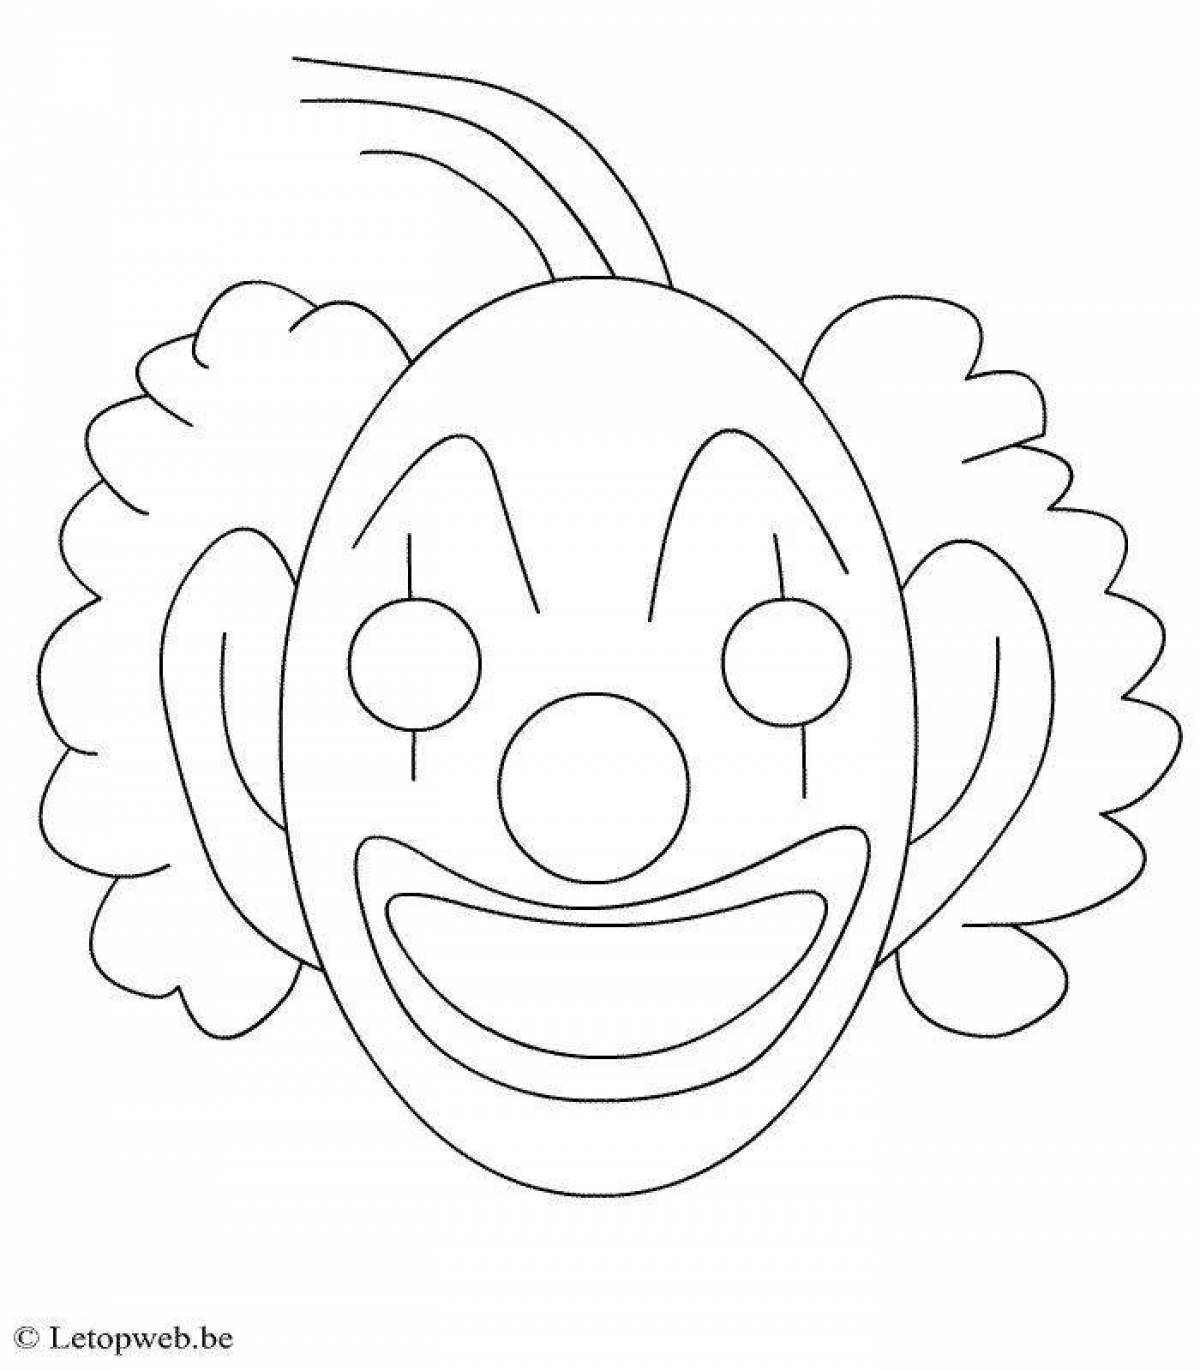 Funny clown face coloring page